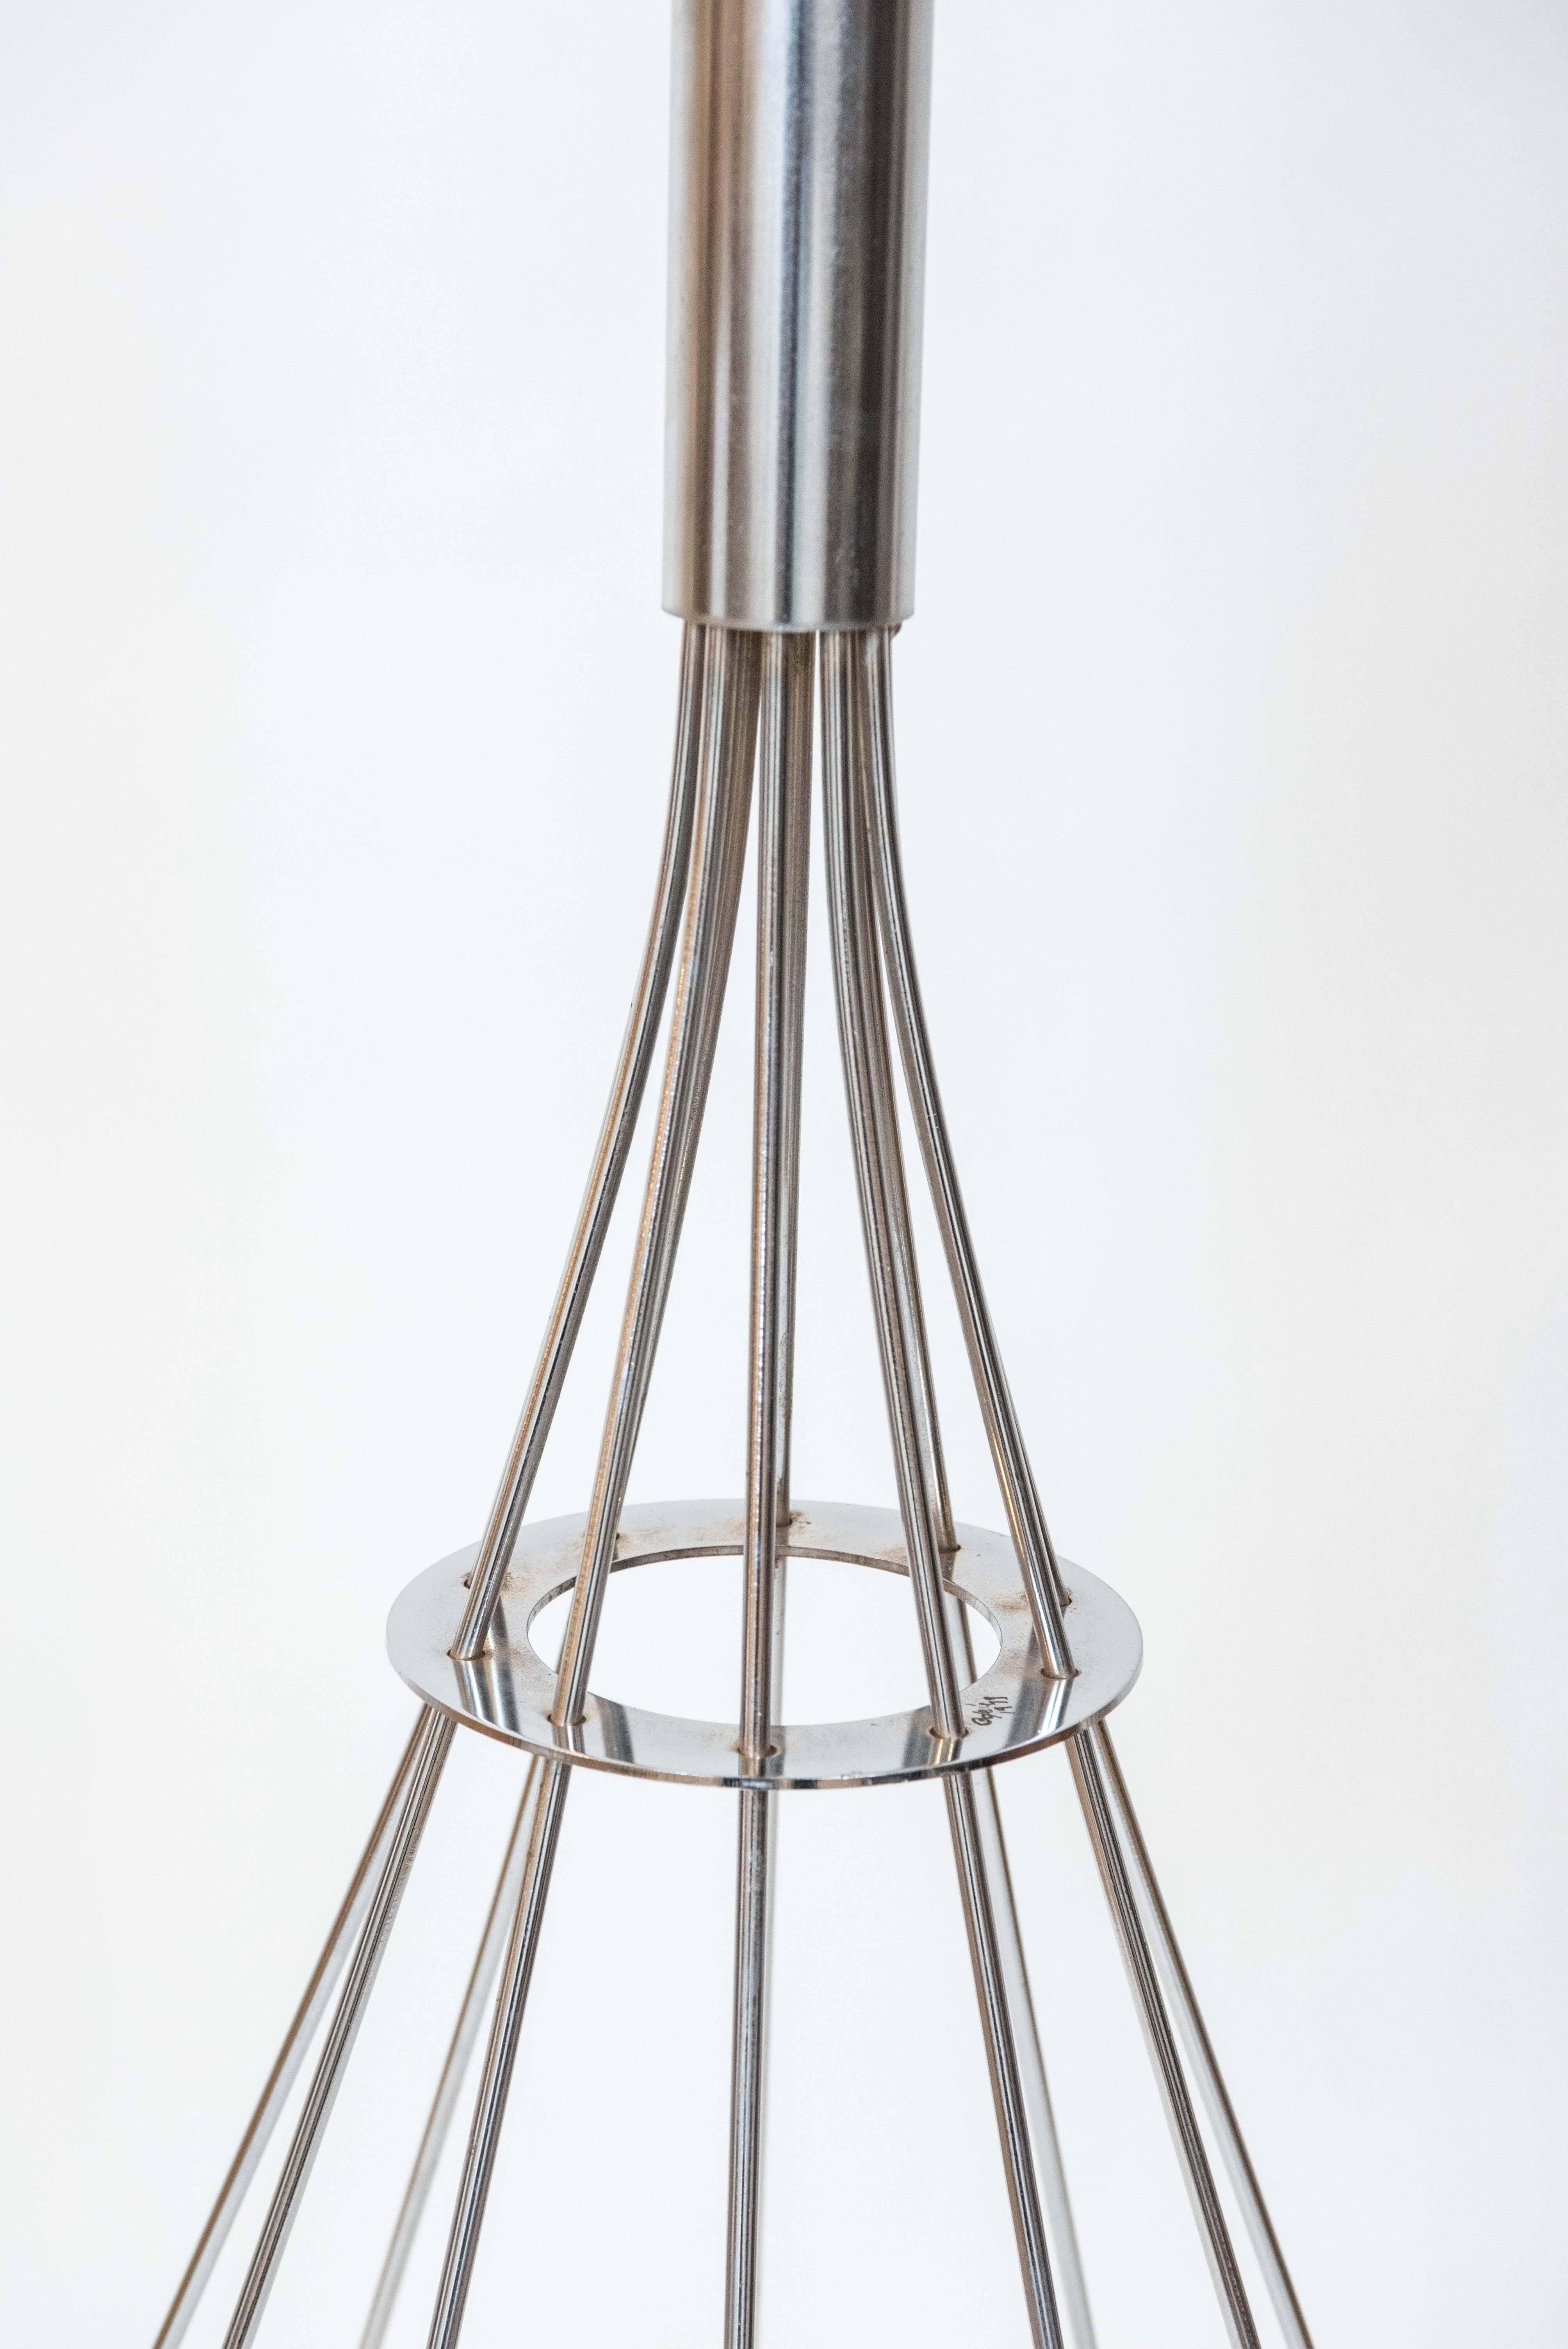 American Oversized Whisk by Curtis Jere